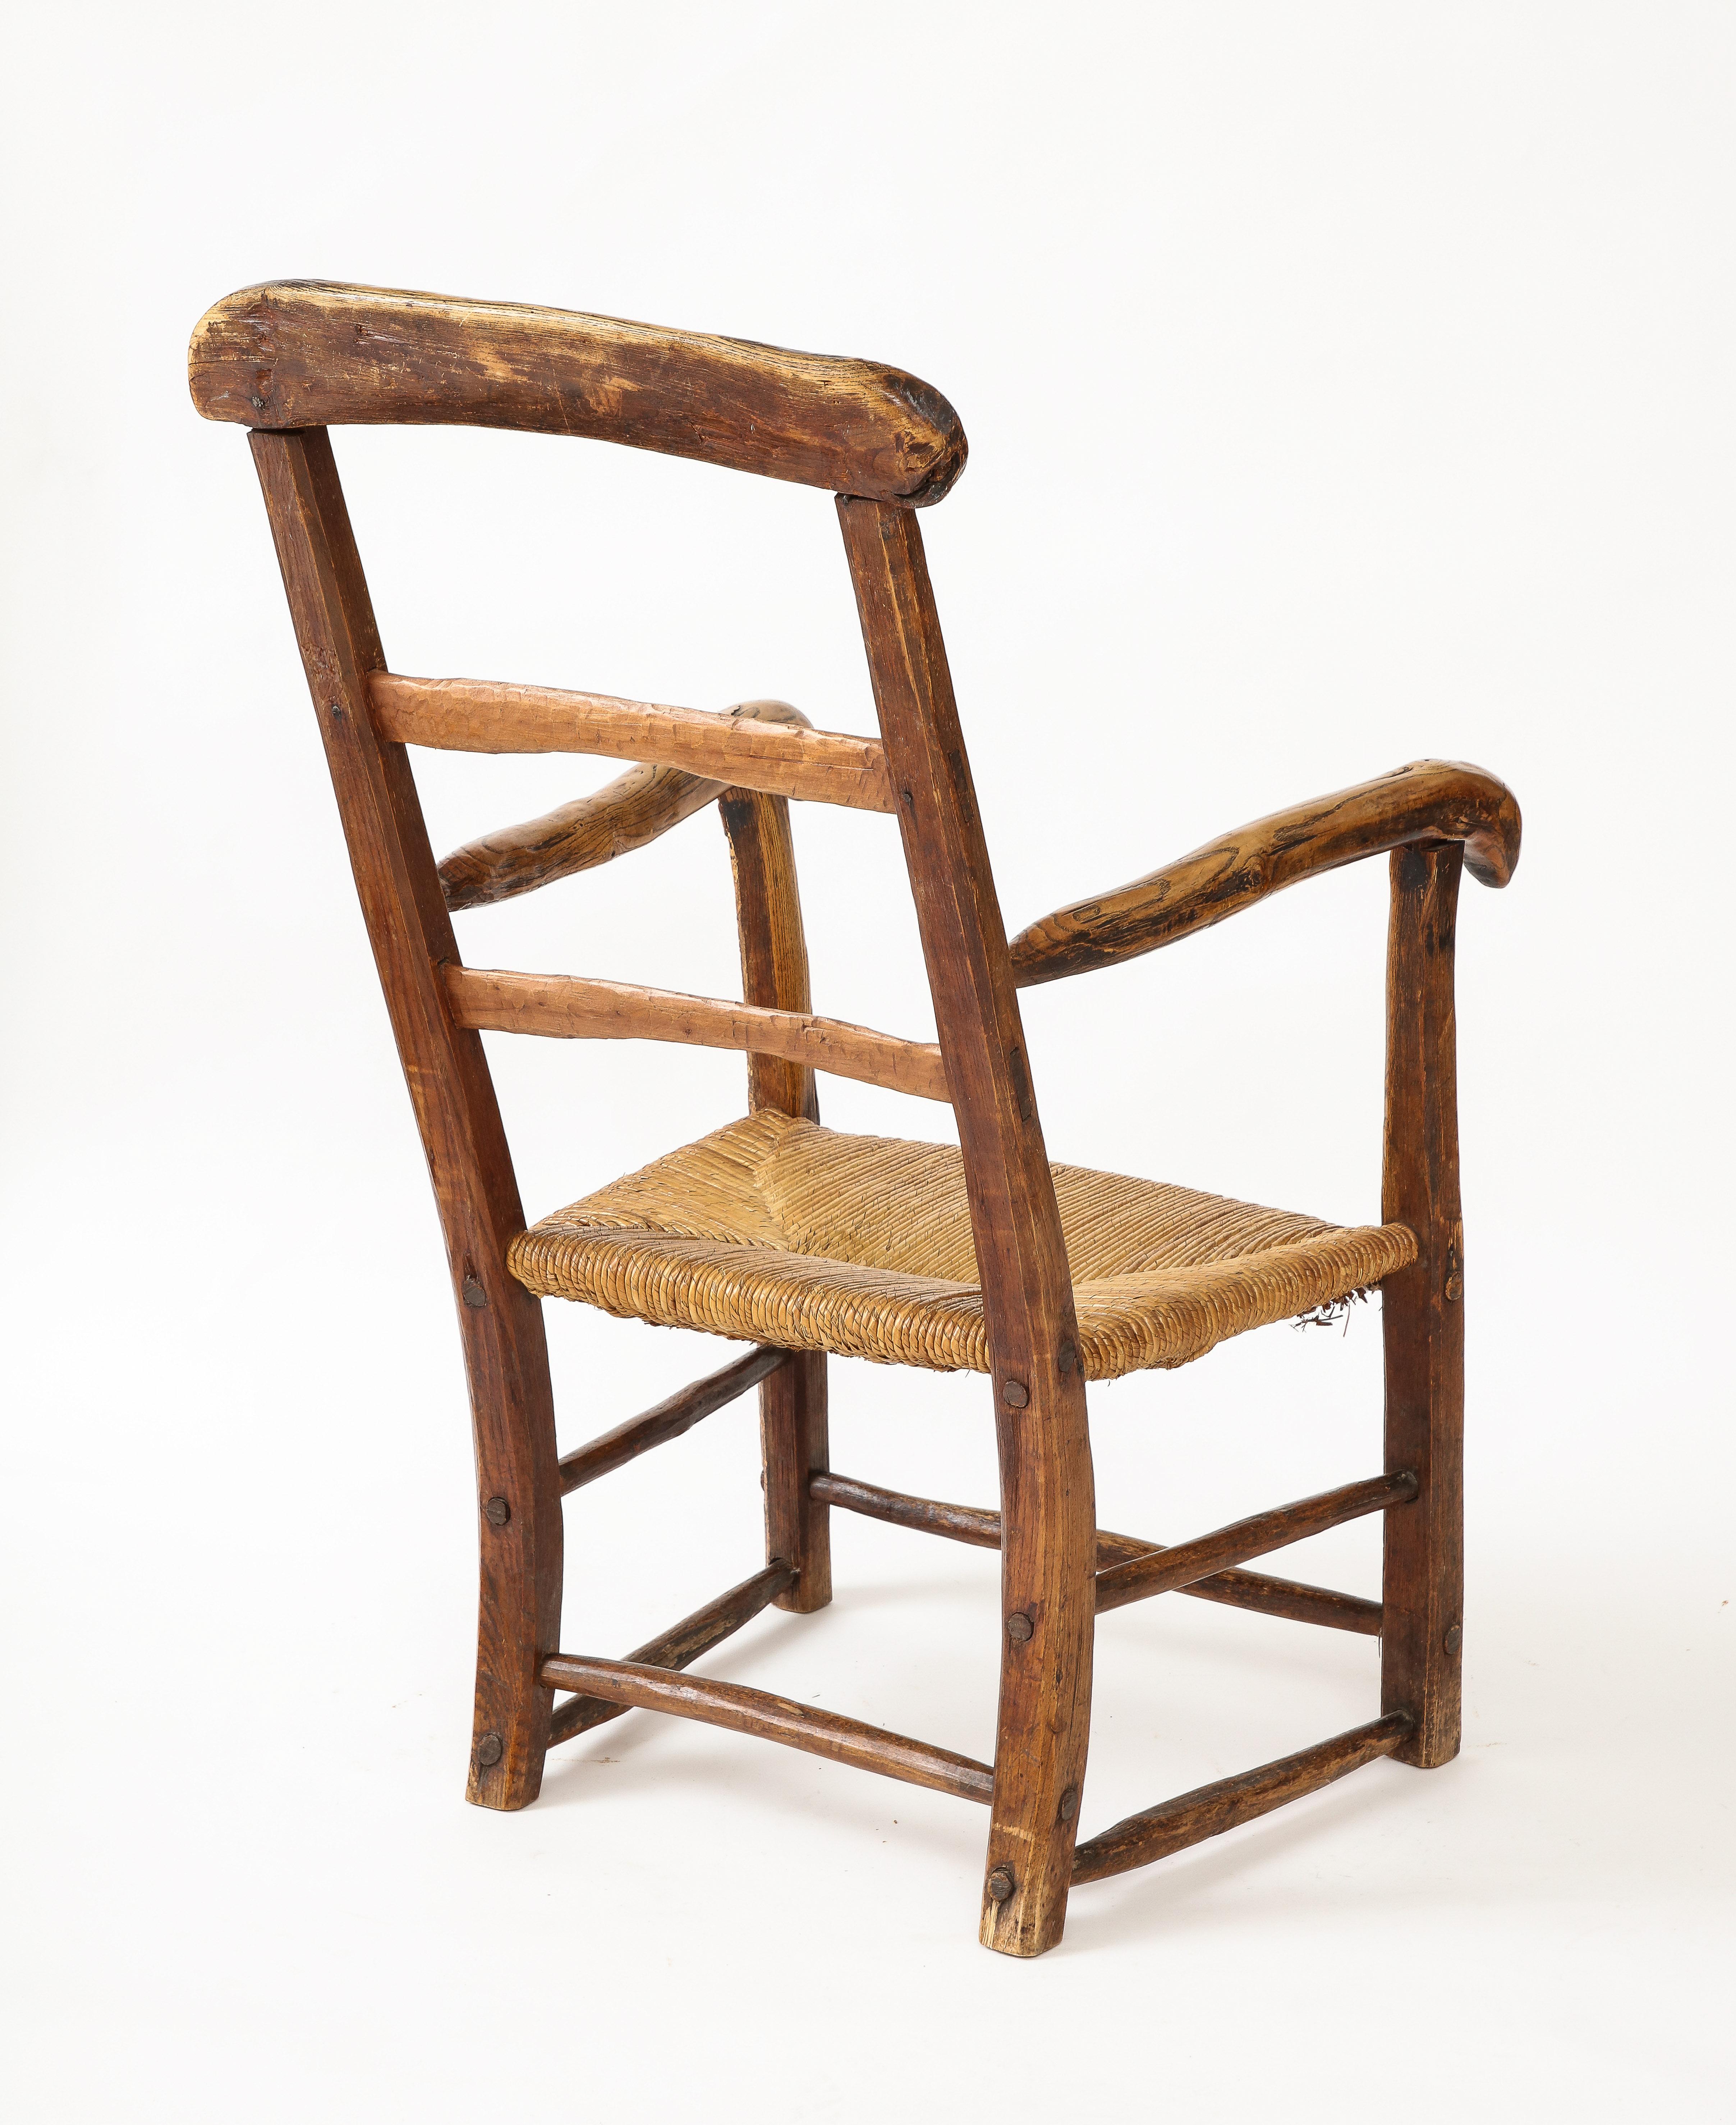 Late 19th Century 19th Century Rustic French Chair with Straw Seat For Sale